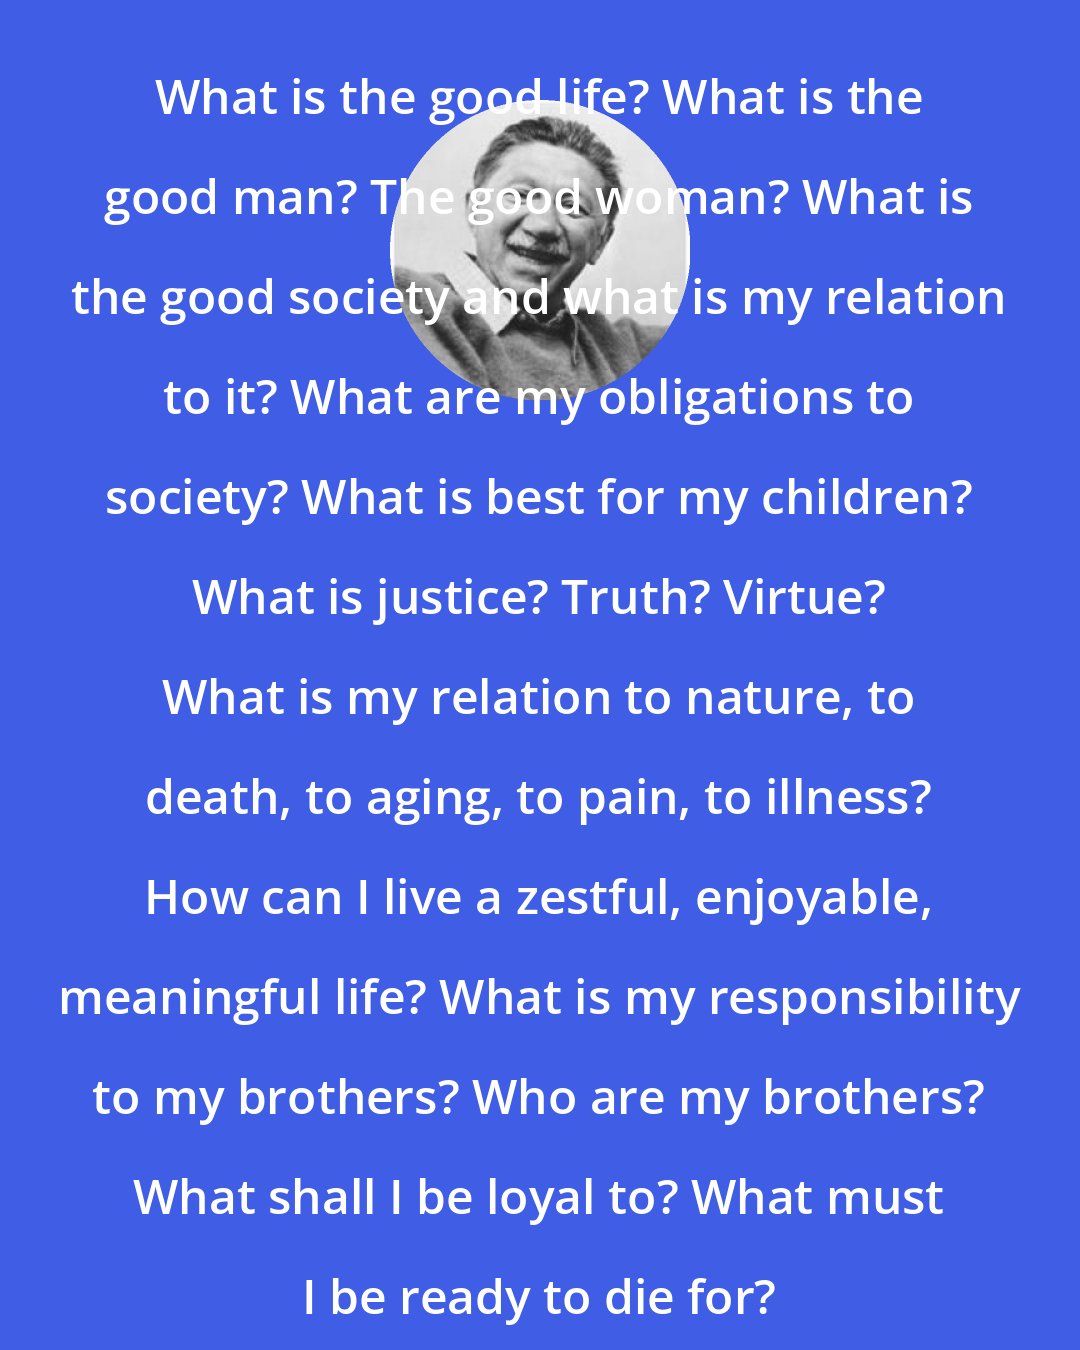 Abraham Maslow: What is the good life? What is the good man? The good woman? What is the good society and what is my relation to it? What are my obligations to society? What is best for my children? What is justice? Truth? Virtue? What is my relation to nature, to death, to aging, to pain, to illness? How can I live a zestful, enjoyable, meaningful life? What is my responsibility to my brothers? Who are my brothers? What shall I be loyal to? What must I be ready to die for?